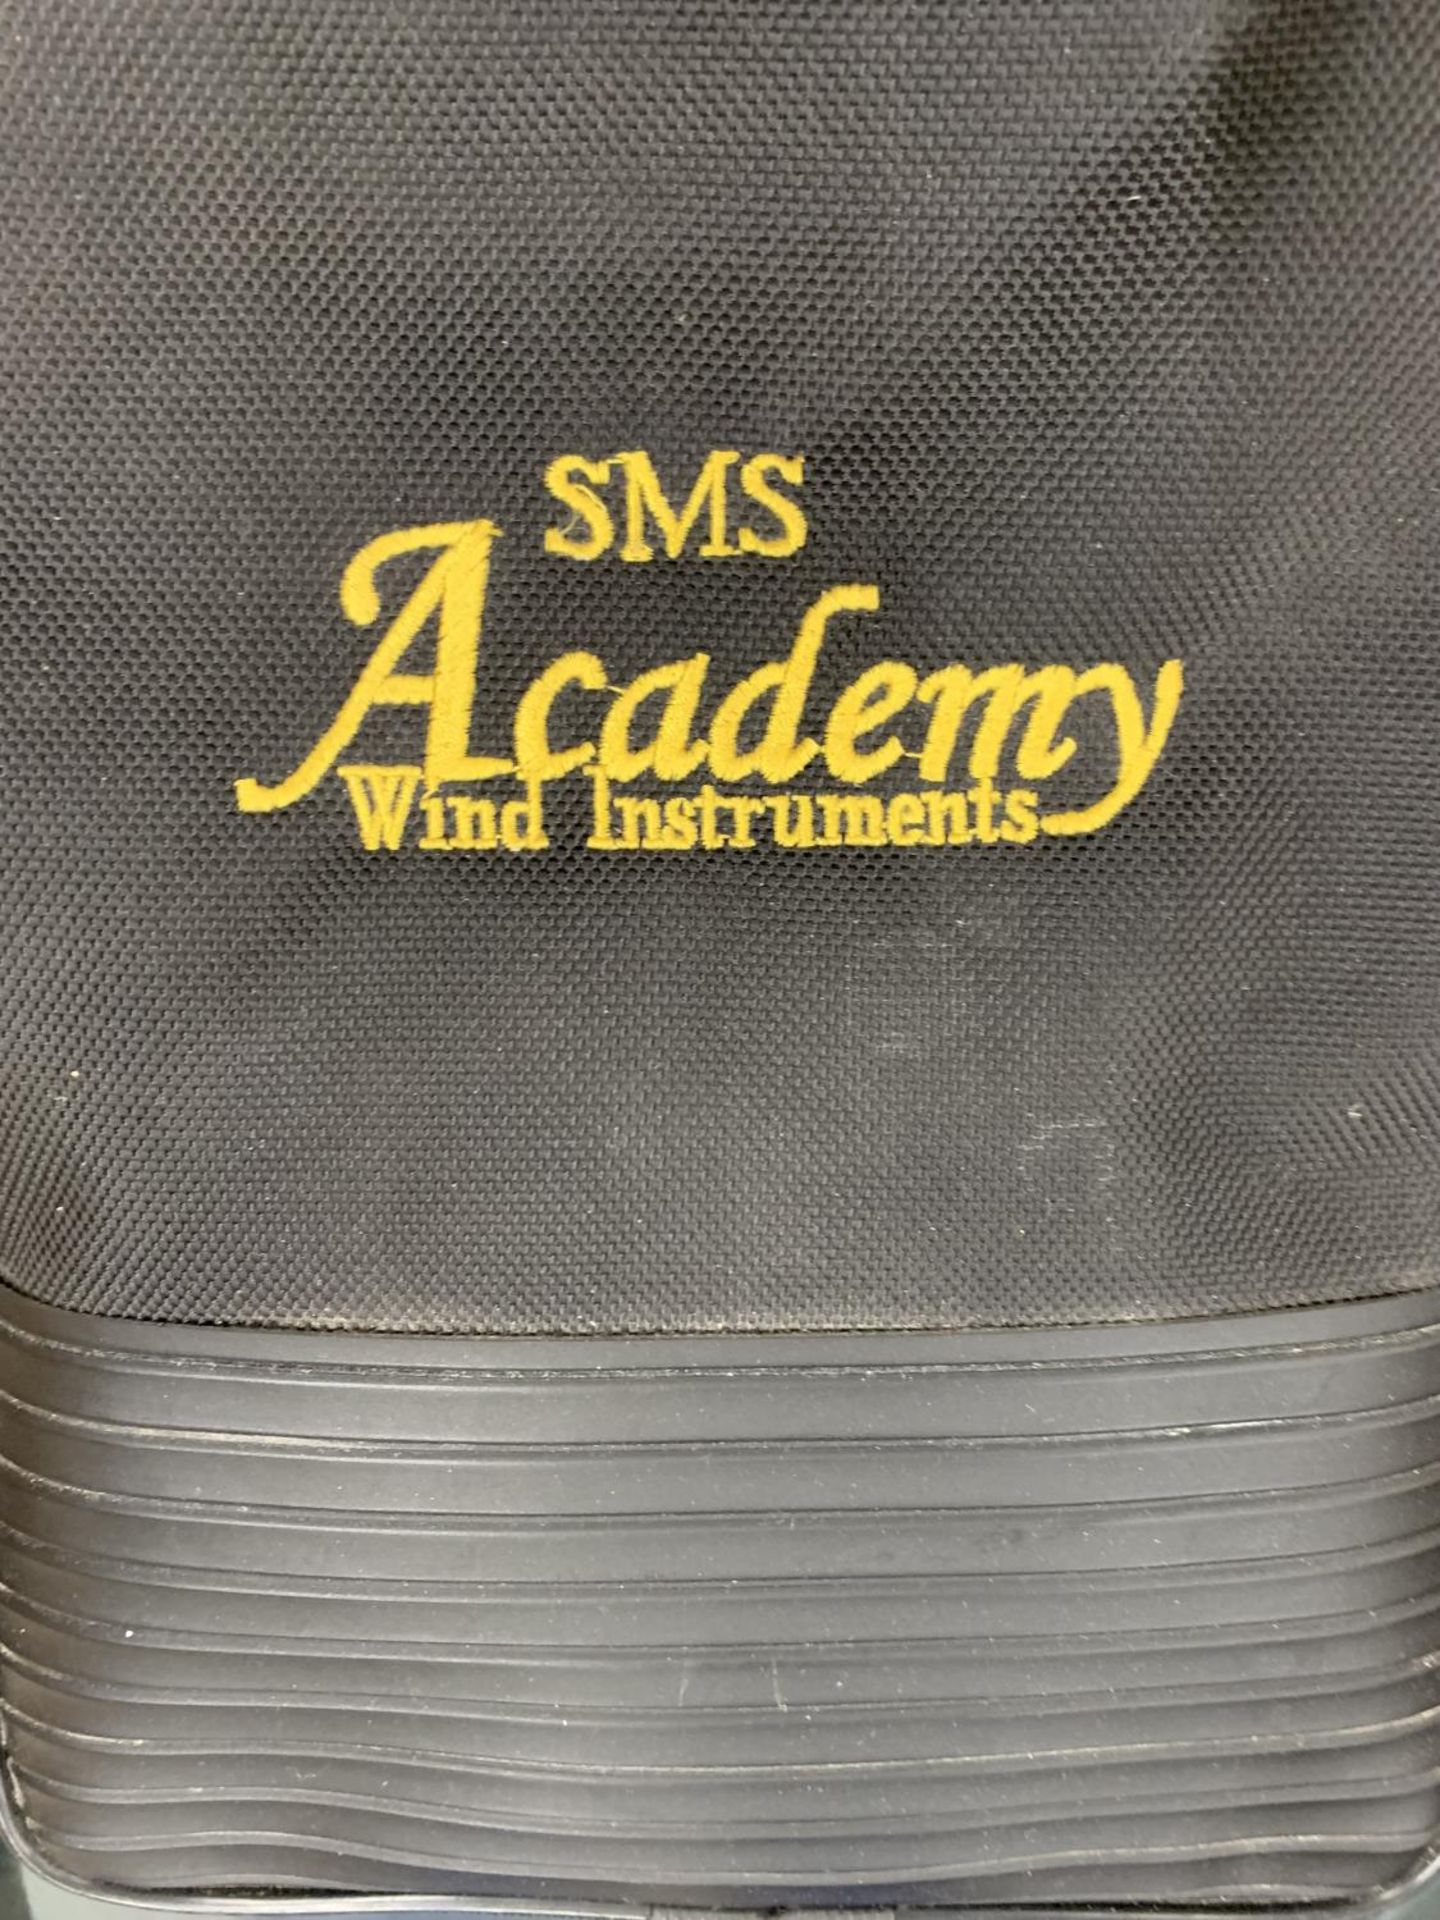 AN SMS ACADEMY BLACK CLARINET IN A FITTED SOFT CASE - Image 4 of 4